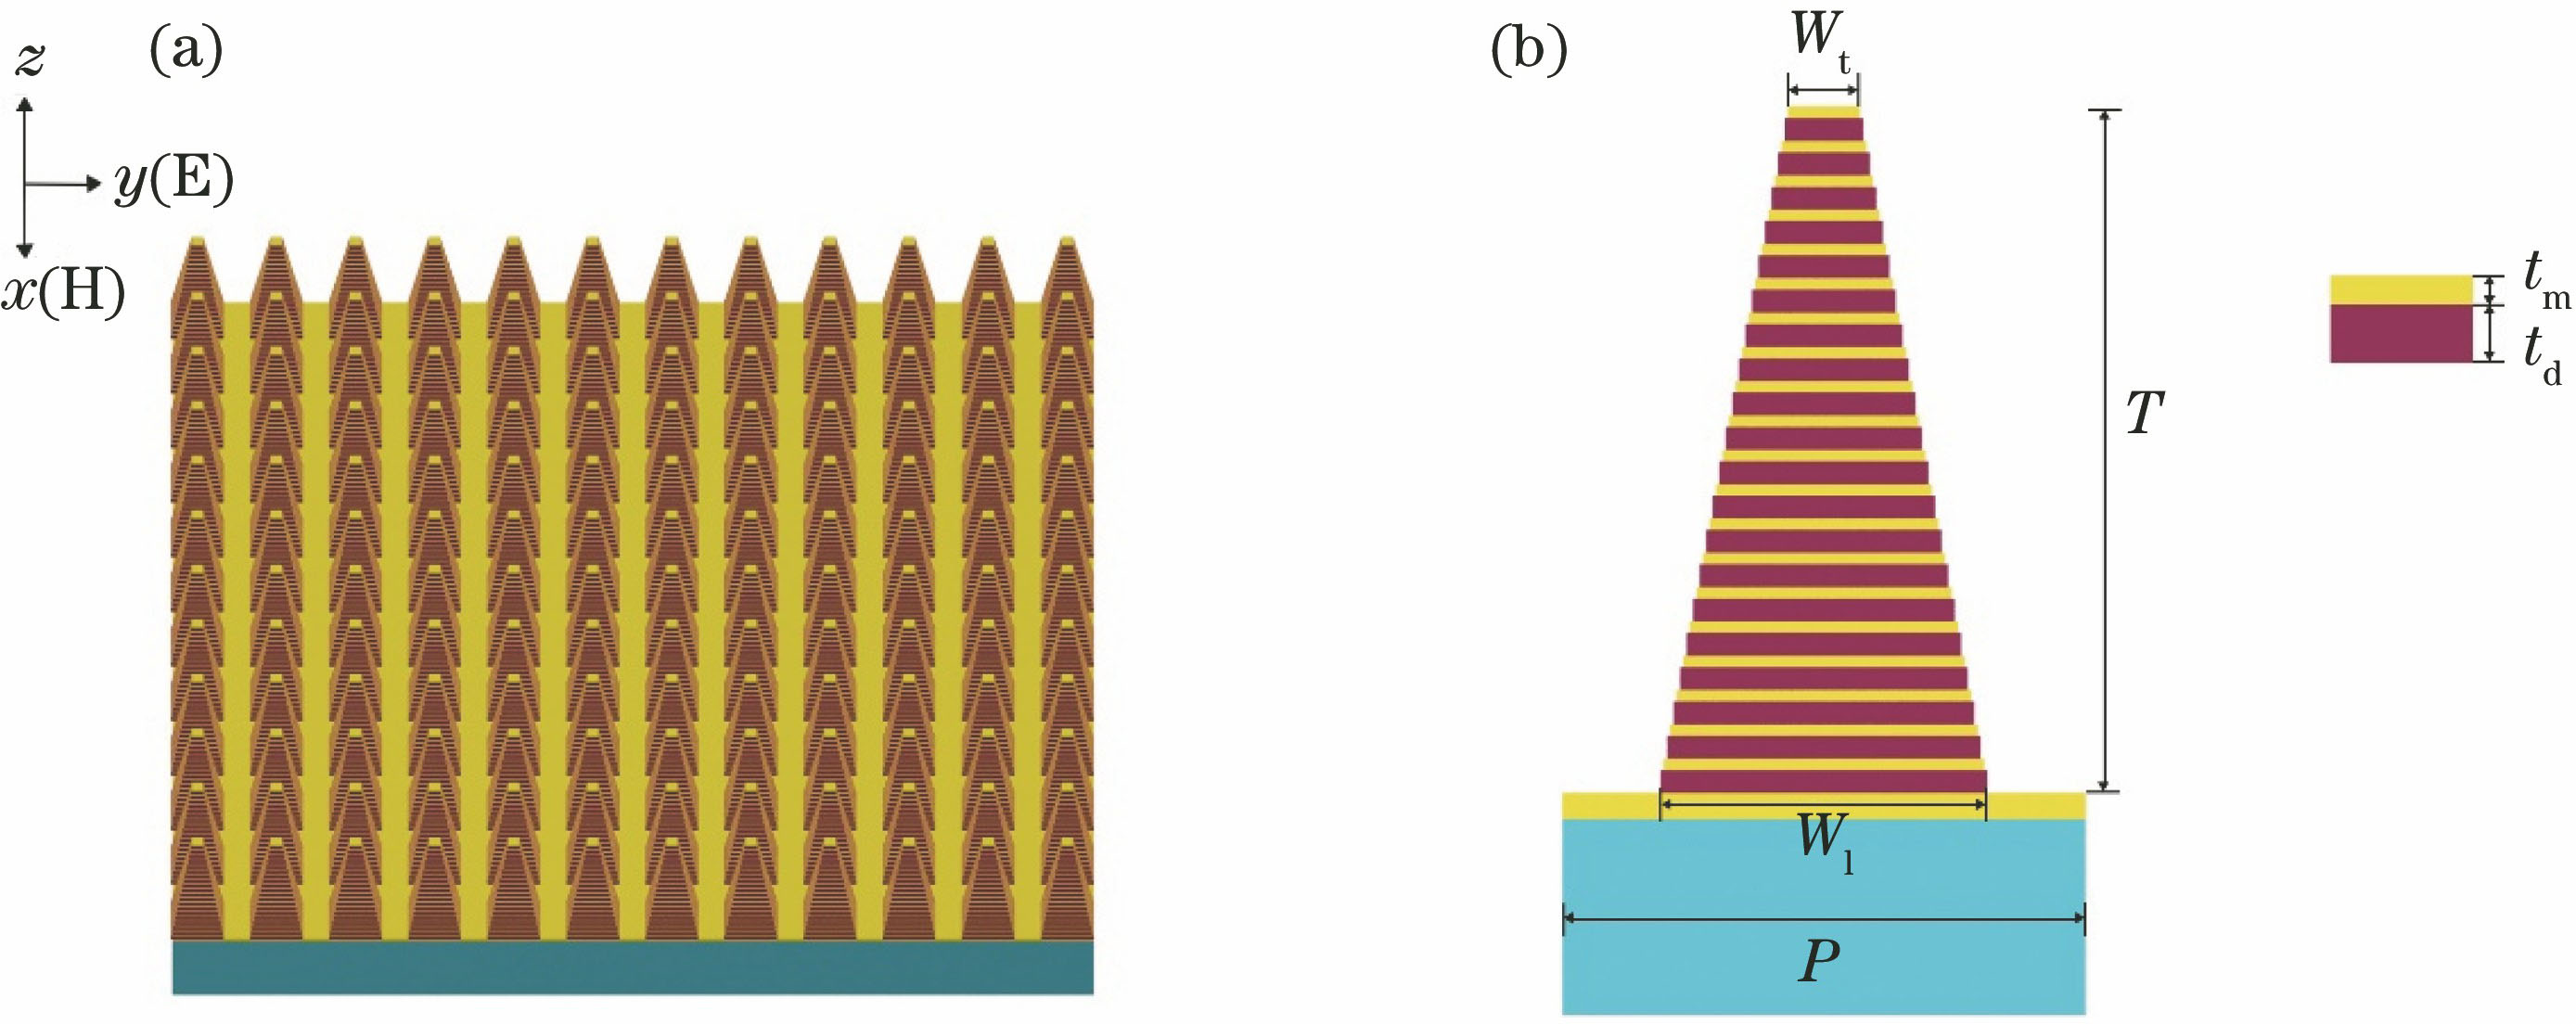 Schematic of metamaterial absorber structure model. (a) Three-dimensional structure; (b) plane diagram of structural elements